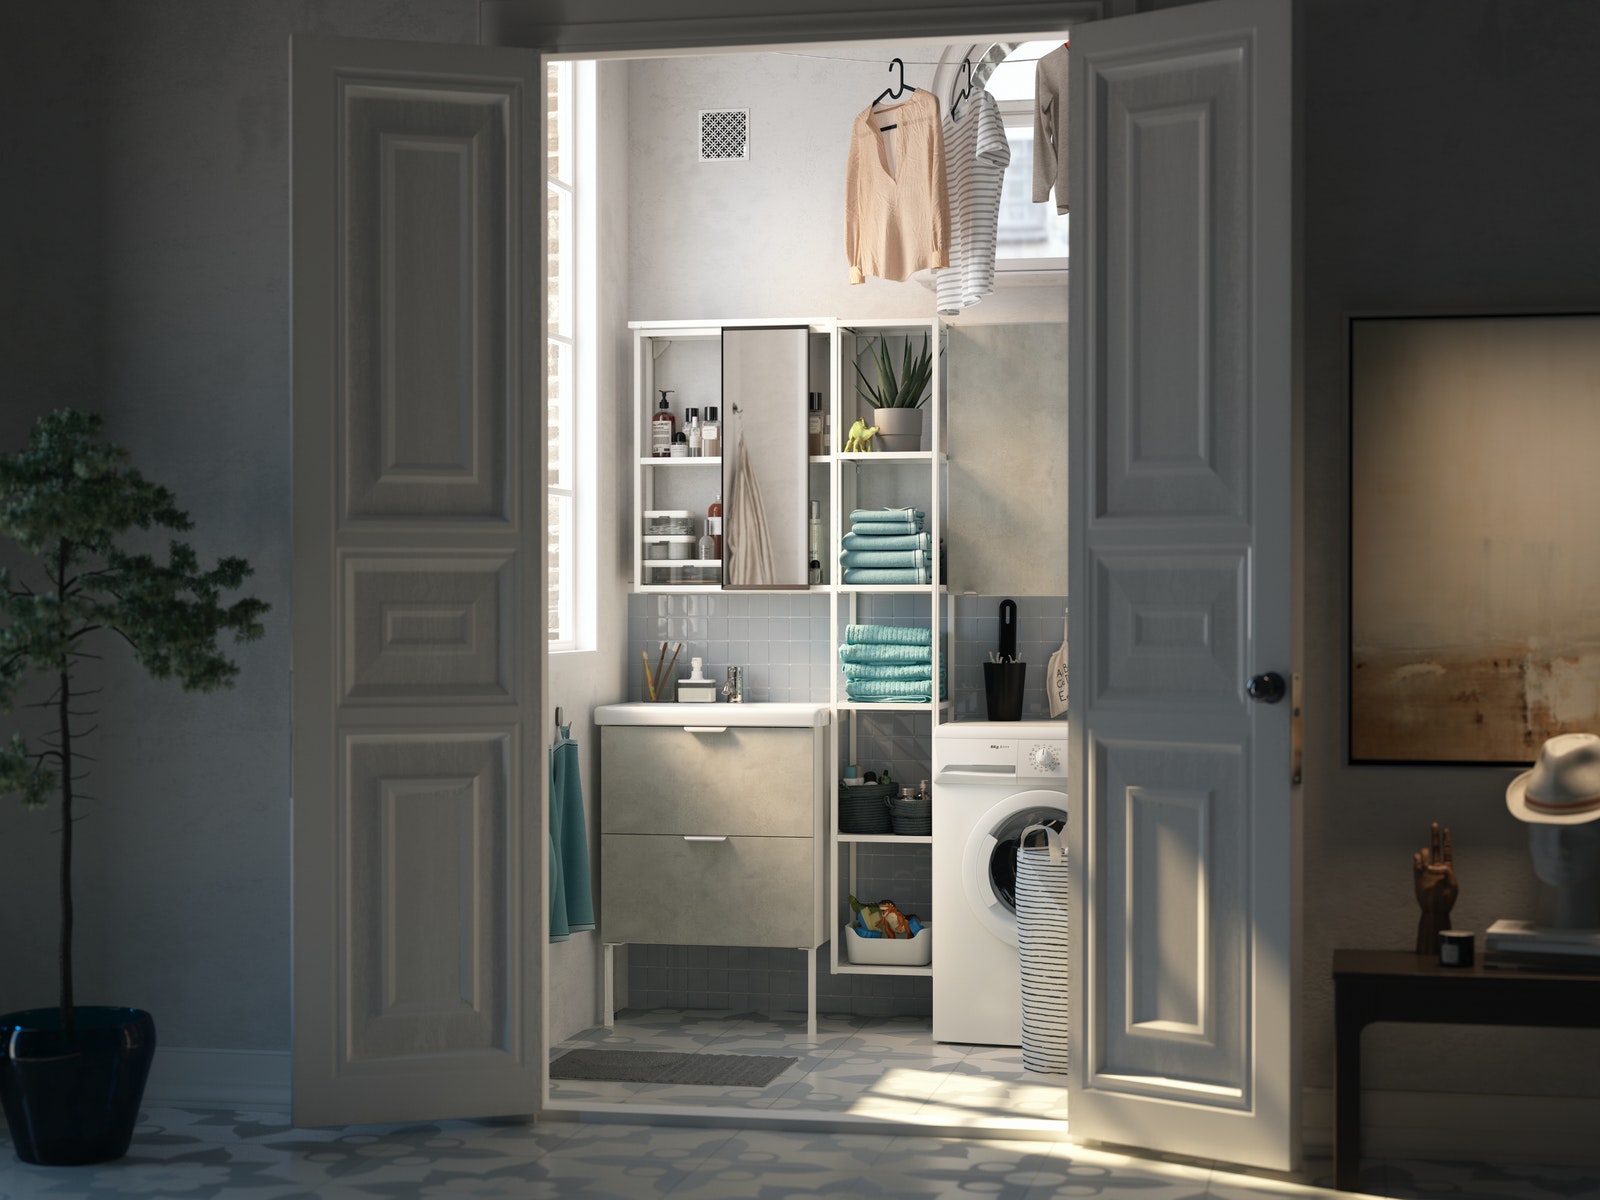 IKEA - A bathroom and laundry room in one